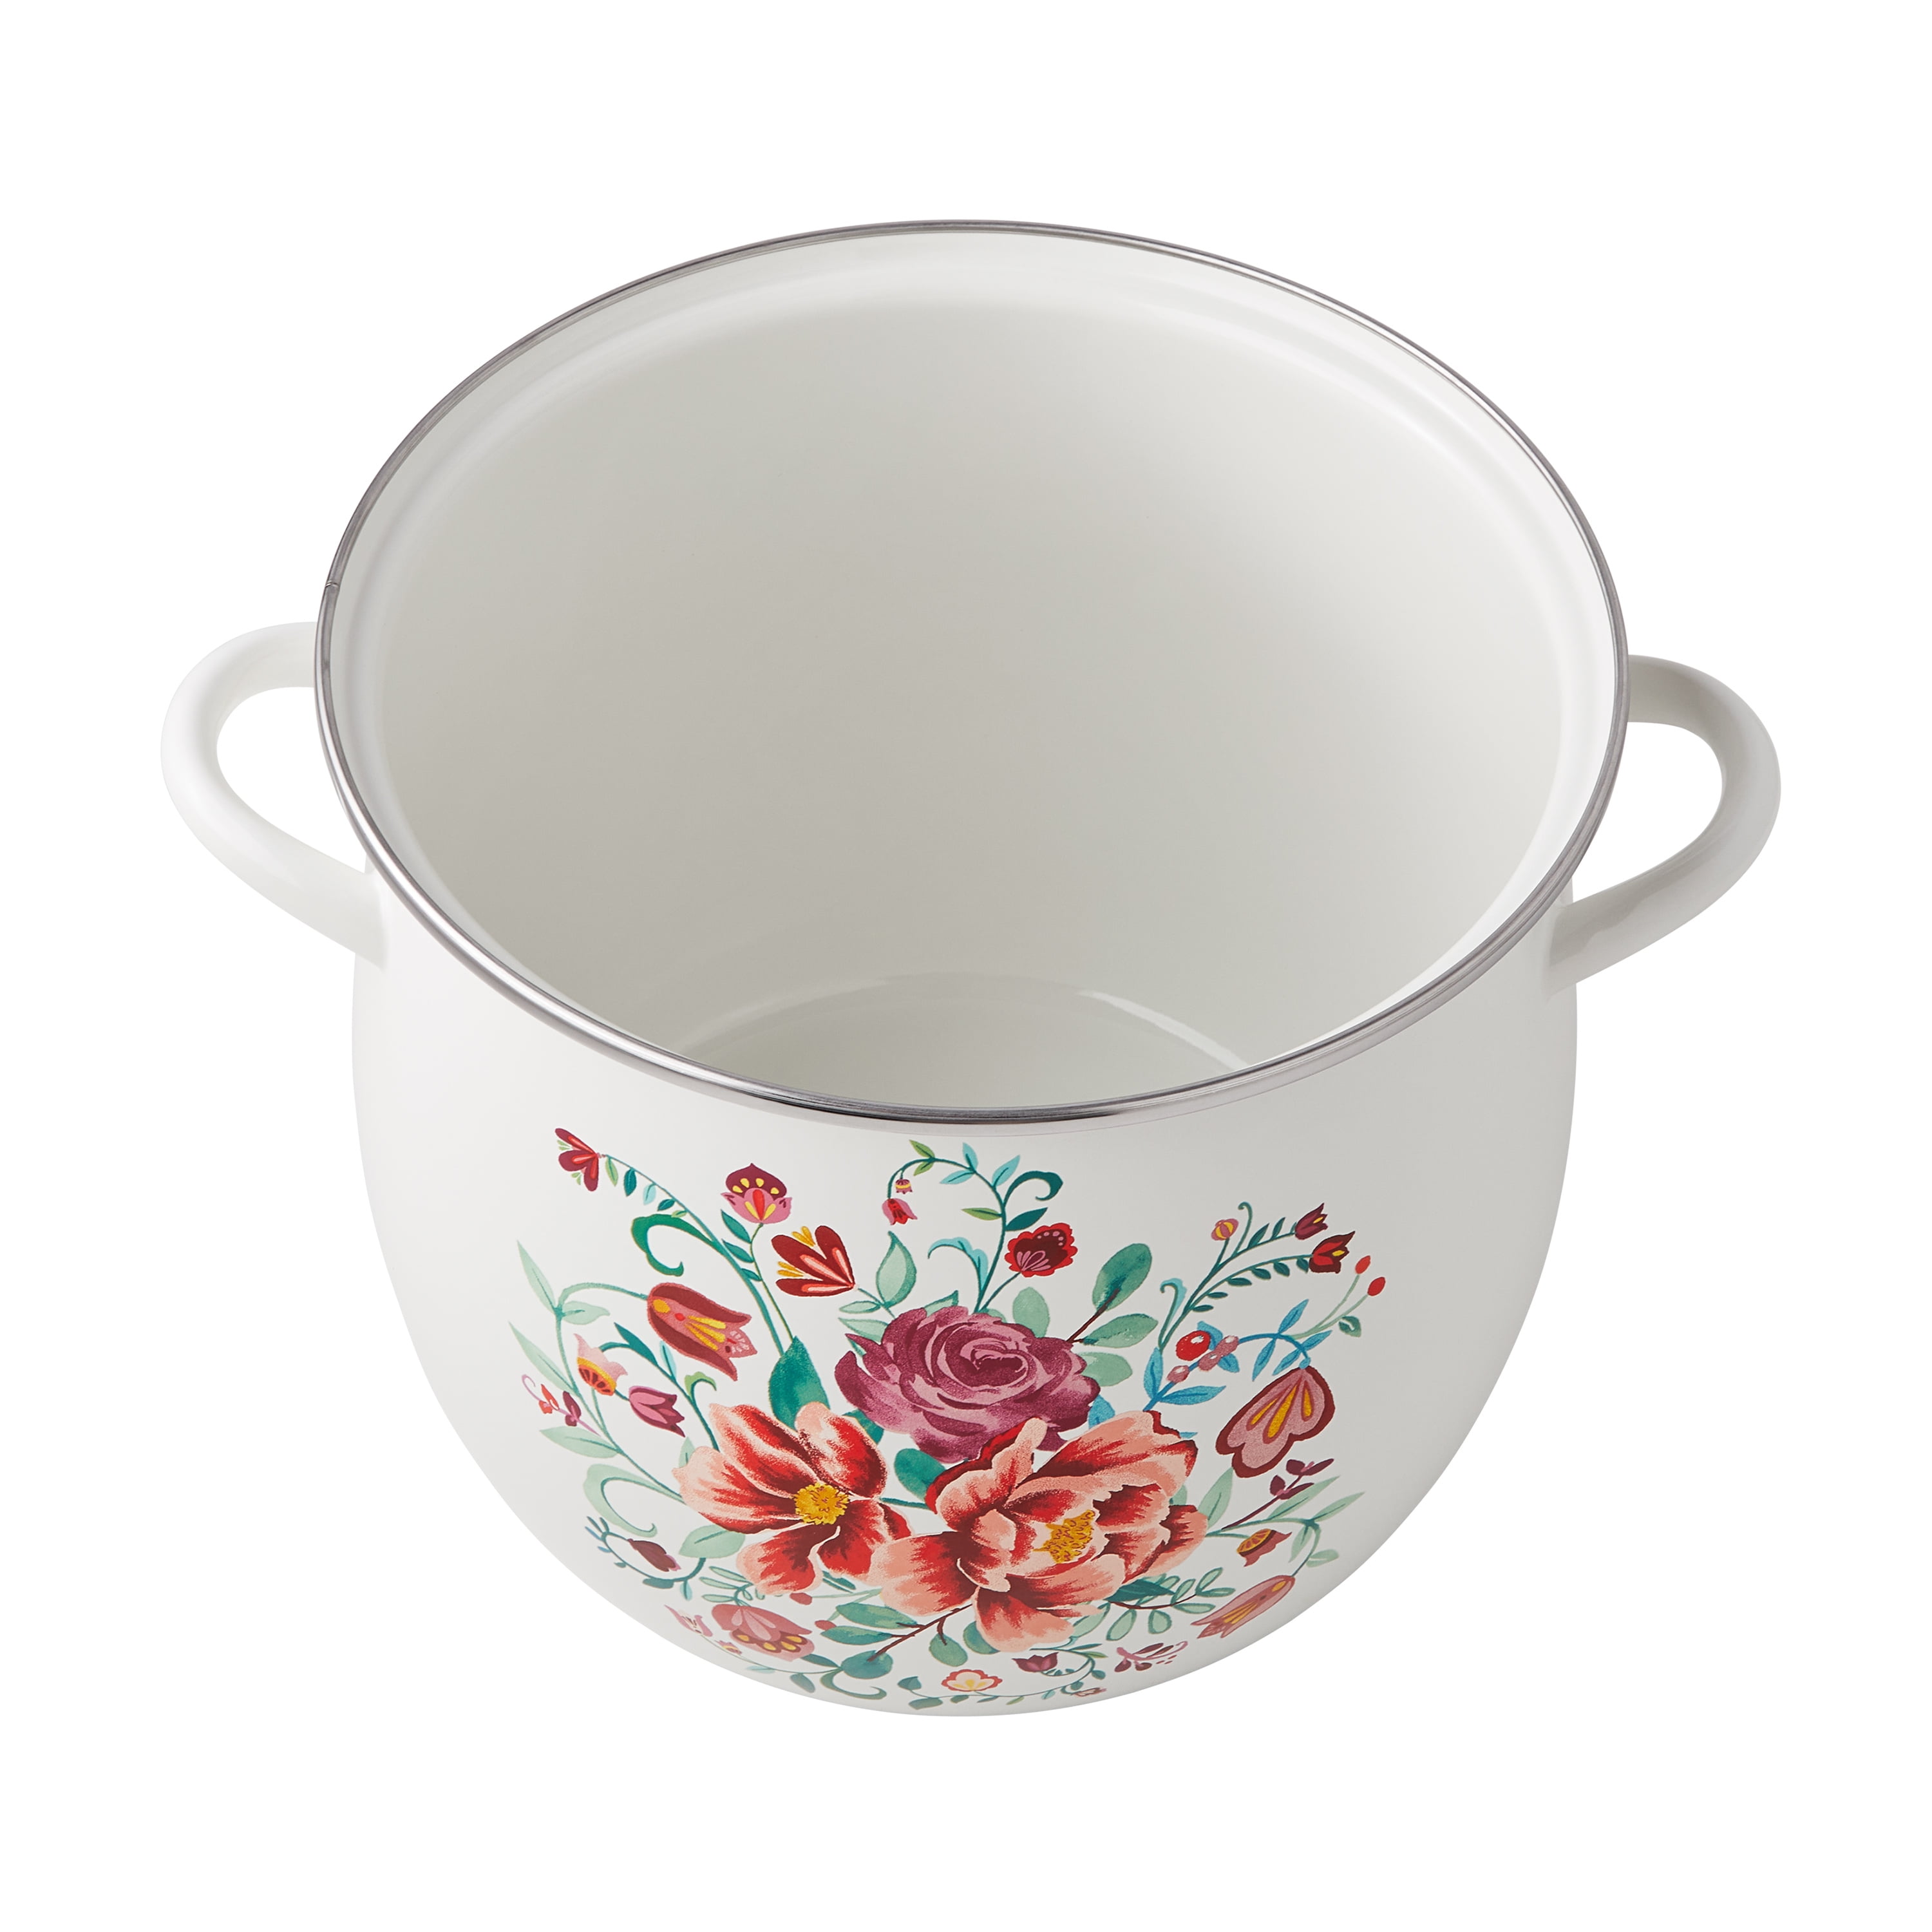 ULS SEA SHIPMENT (1379803-P) on Instagram: The Pioneer Woman Vintage  Floral 12-Quart Stock Pot in Turquoise RM379.99 Perfect for making a wide  variety of dishes Durable enamel-on-steel construction offers lasting  performance and